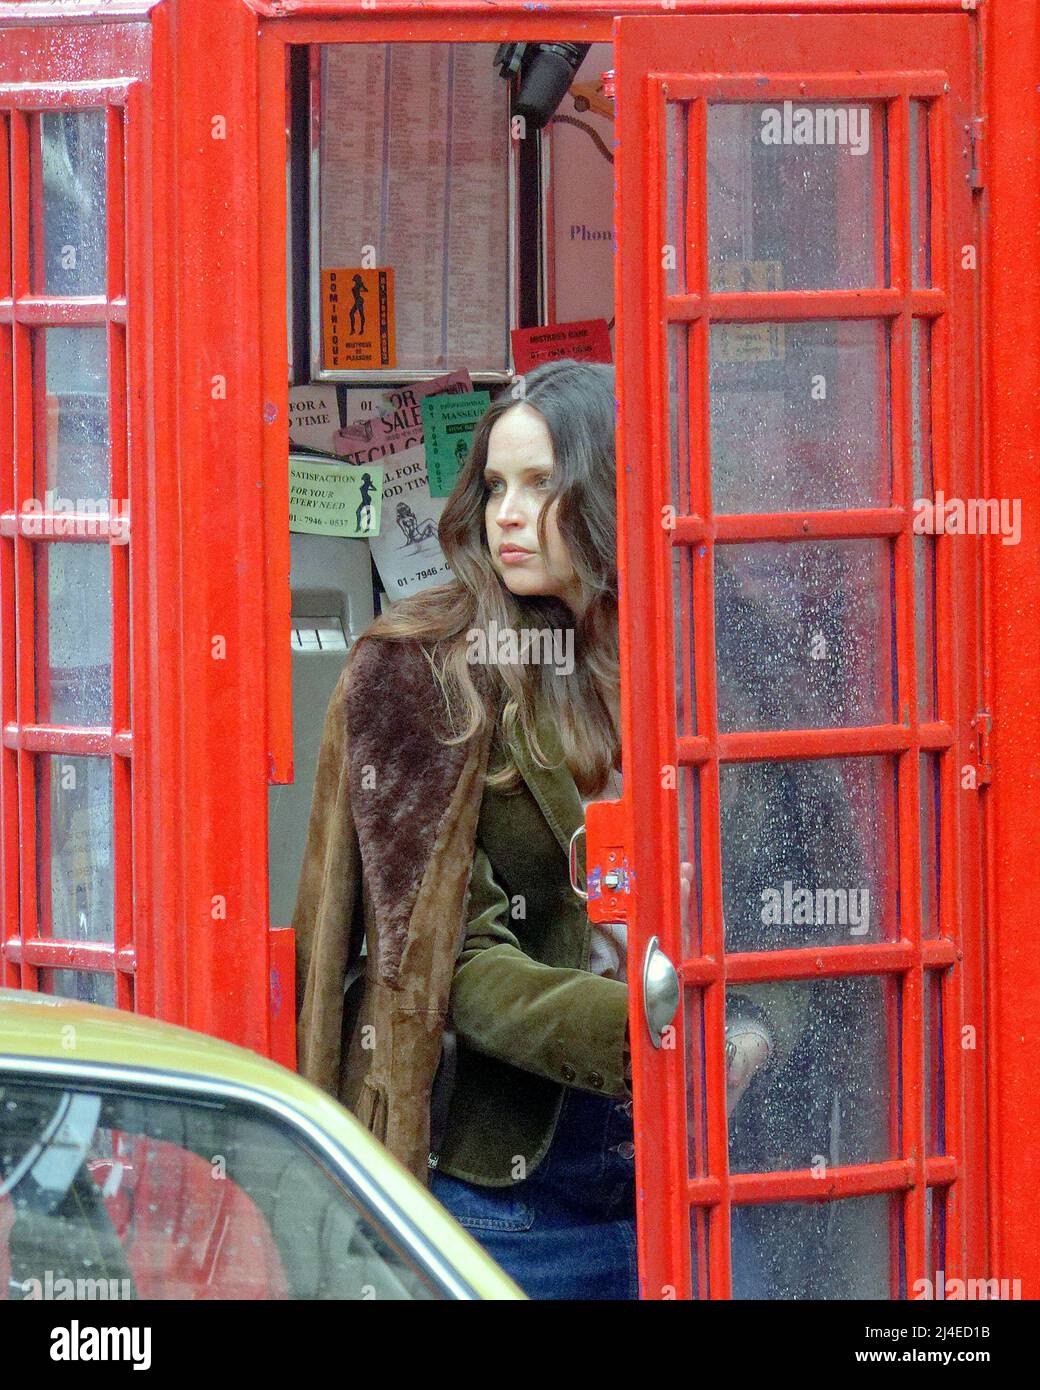 Glasgow, Scotland, UK 14th April, 2022 Hollywood comes to the city again to the tune of have you seen miss jones as Felicity Jones filming in the city saw a very sparkly set of eyes as she looked every inch a film star amongst the drab seventies London set that is Glasgow..  She is seen leaving the famous glasgow pub the griffin and heading to and  phoning from a red phone box. Credit Gerard Ferry/Alamy Live News Stock Photo